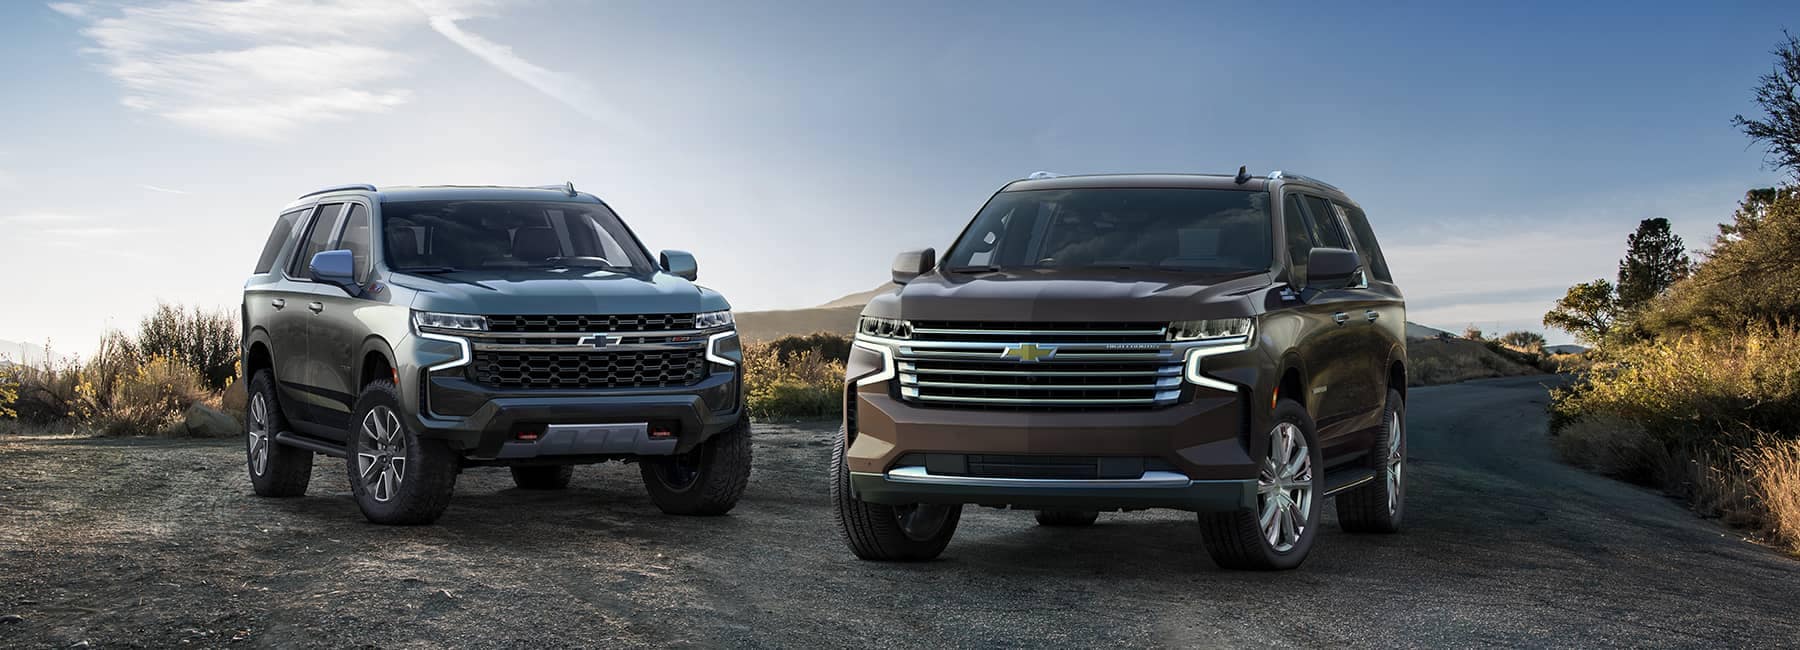 2021 Chevrolet Suburbans parked side-by-side